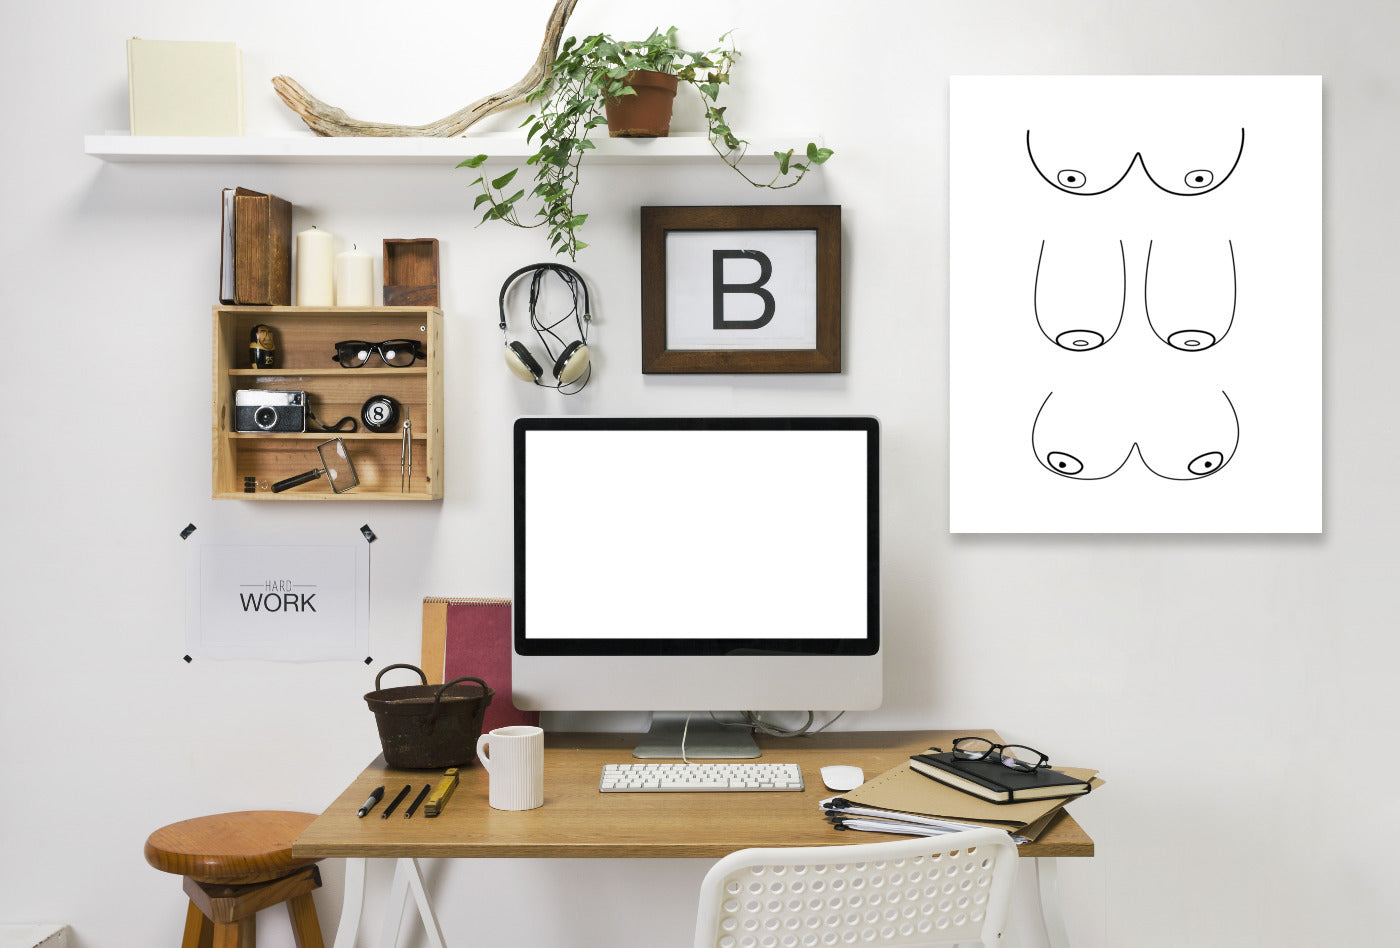 Boobies 3X by Explicit Design Wrapped Canvas - Wrapped Canvas - Americanflat